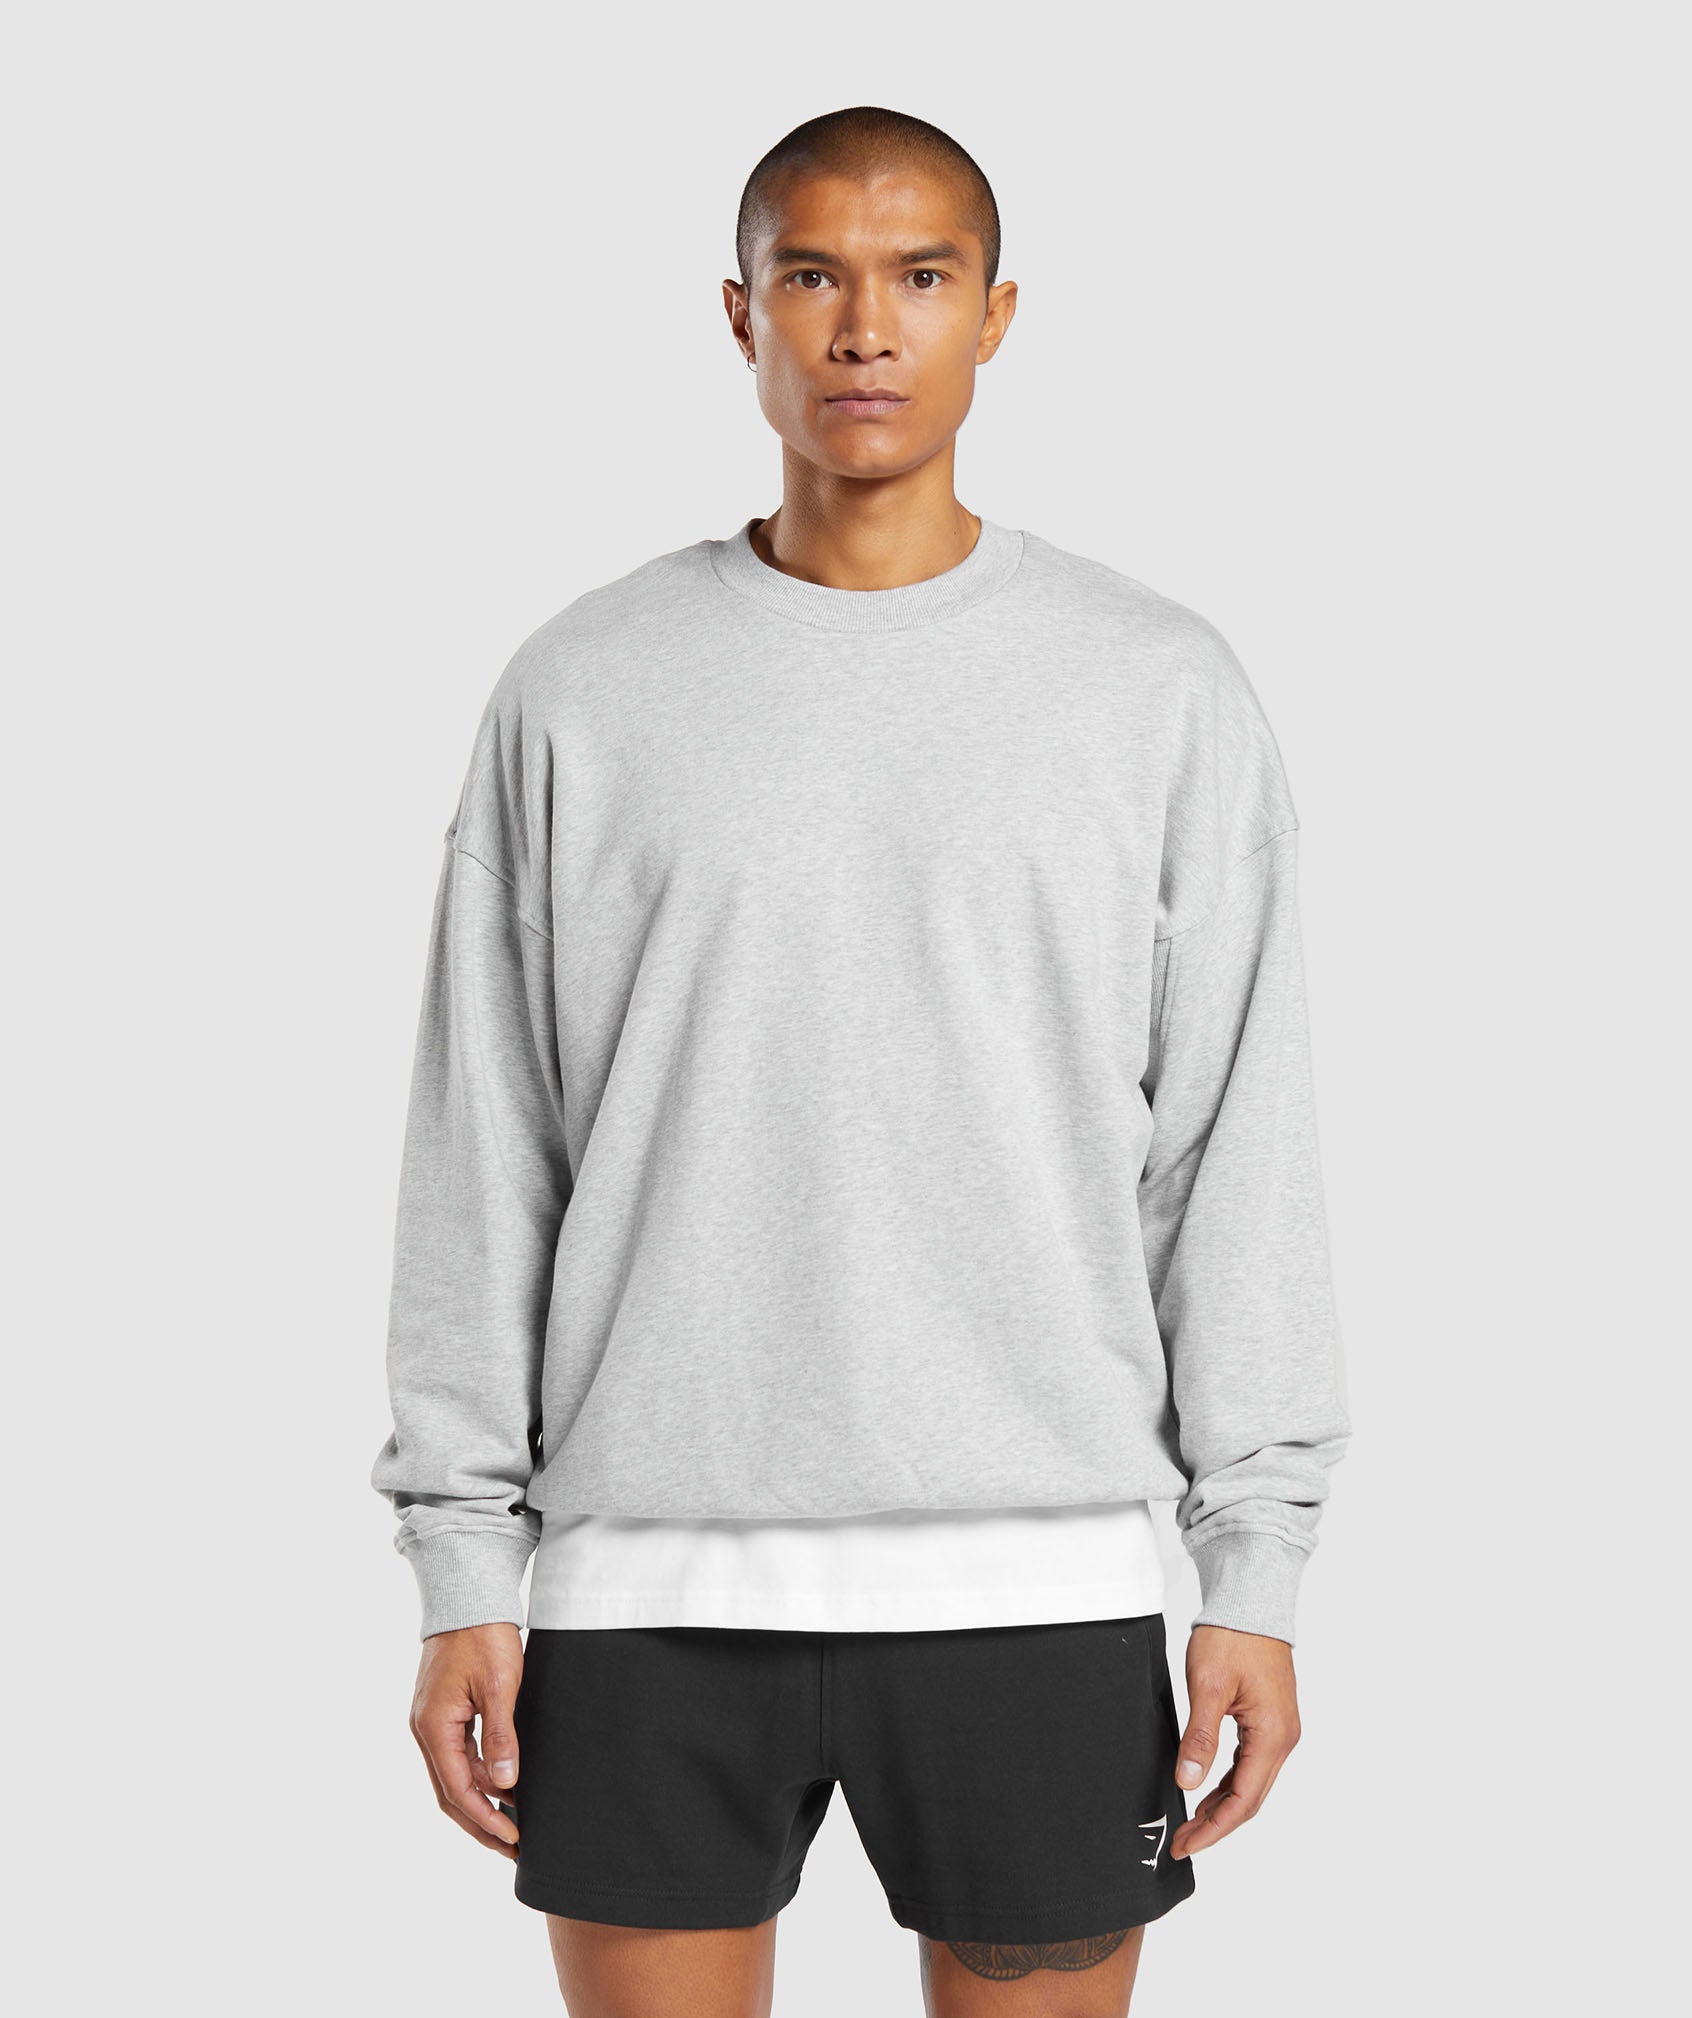 Rest Day Essential Crew in Light Grey Core Marl